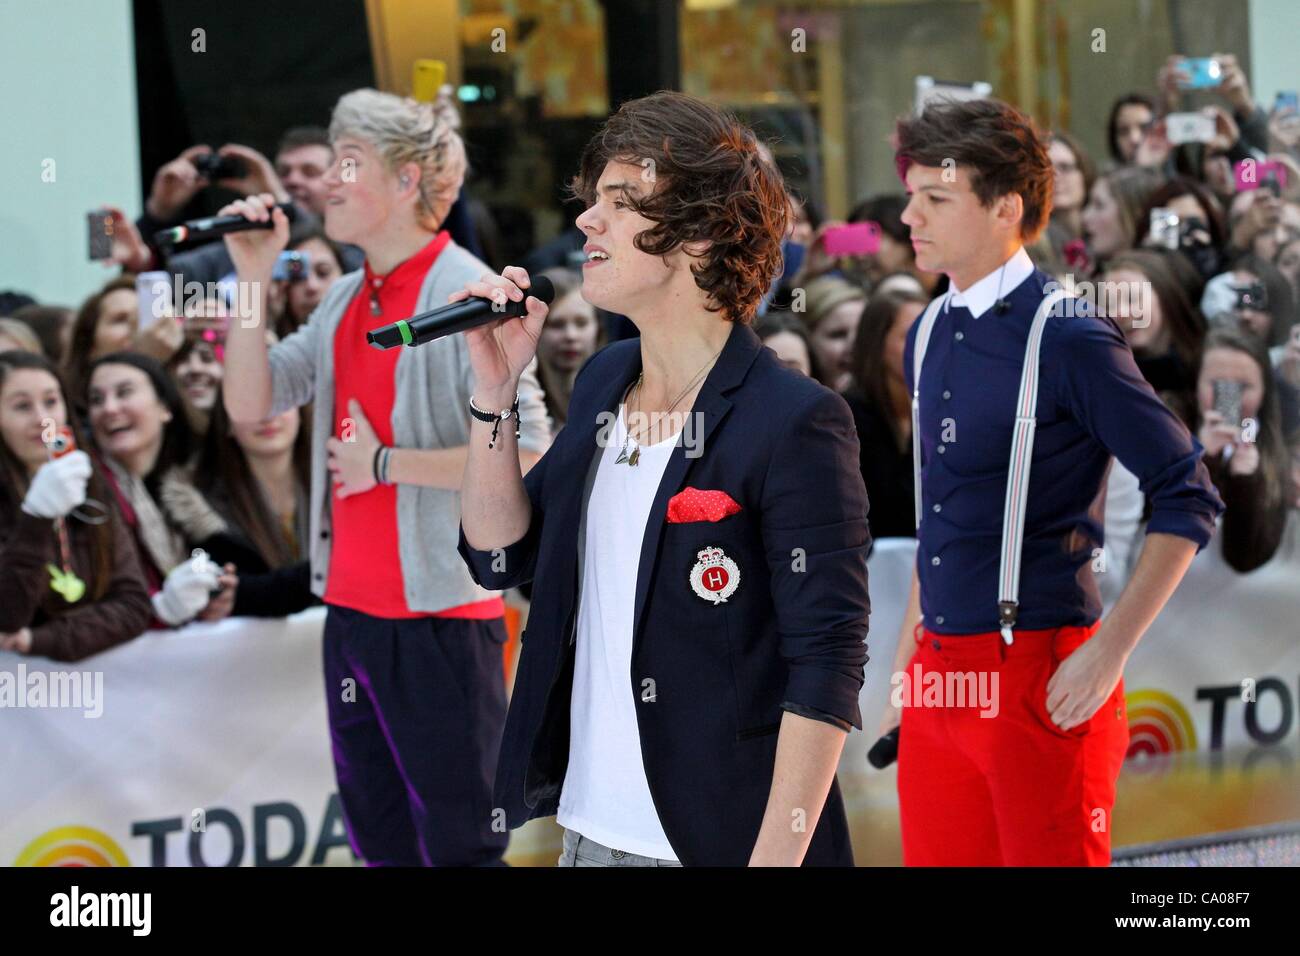 Louis Tomlinson, Harry Styles One Direction Photocall at Lakeside Shopping  Center London, England - 04.03.11 Stock Photo - Alamy